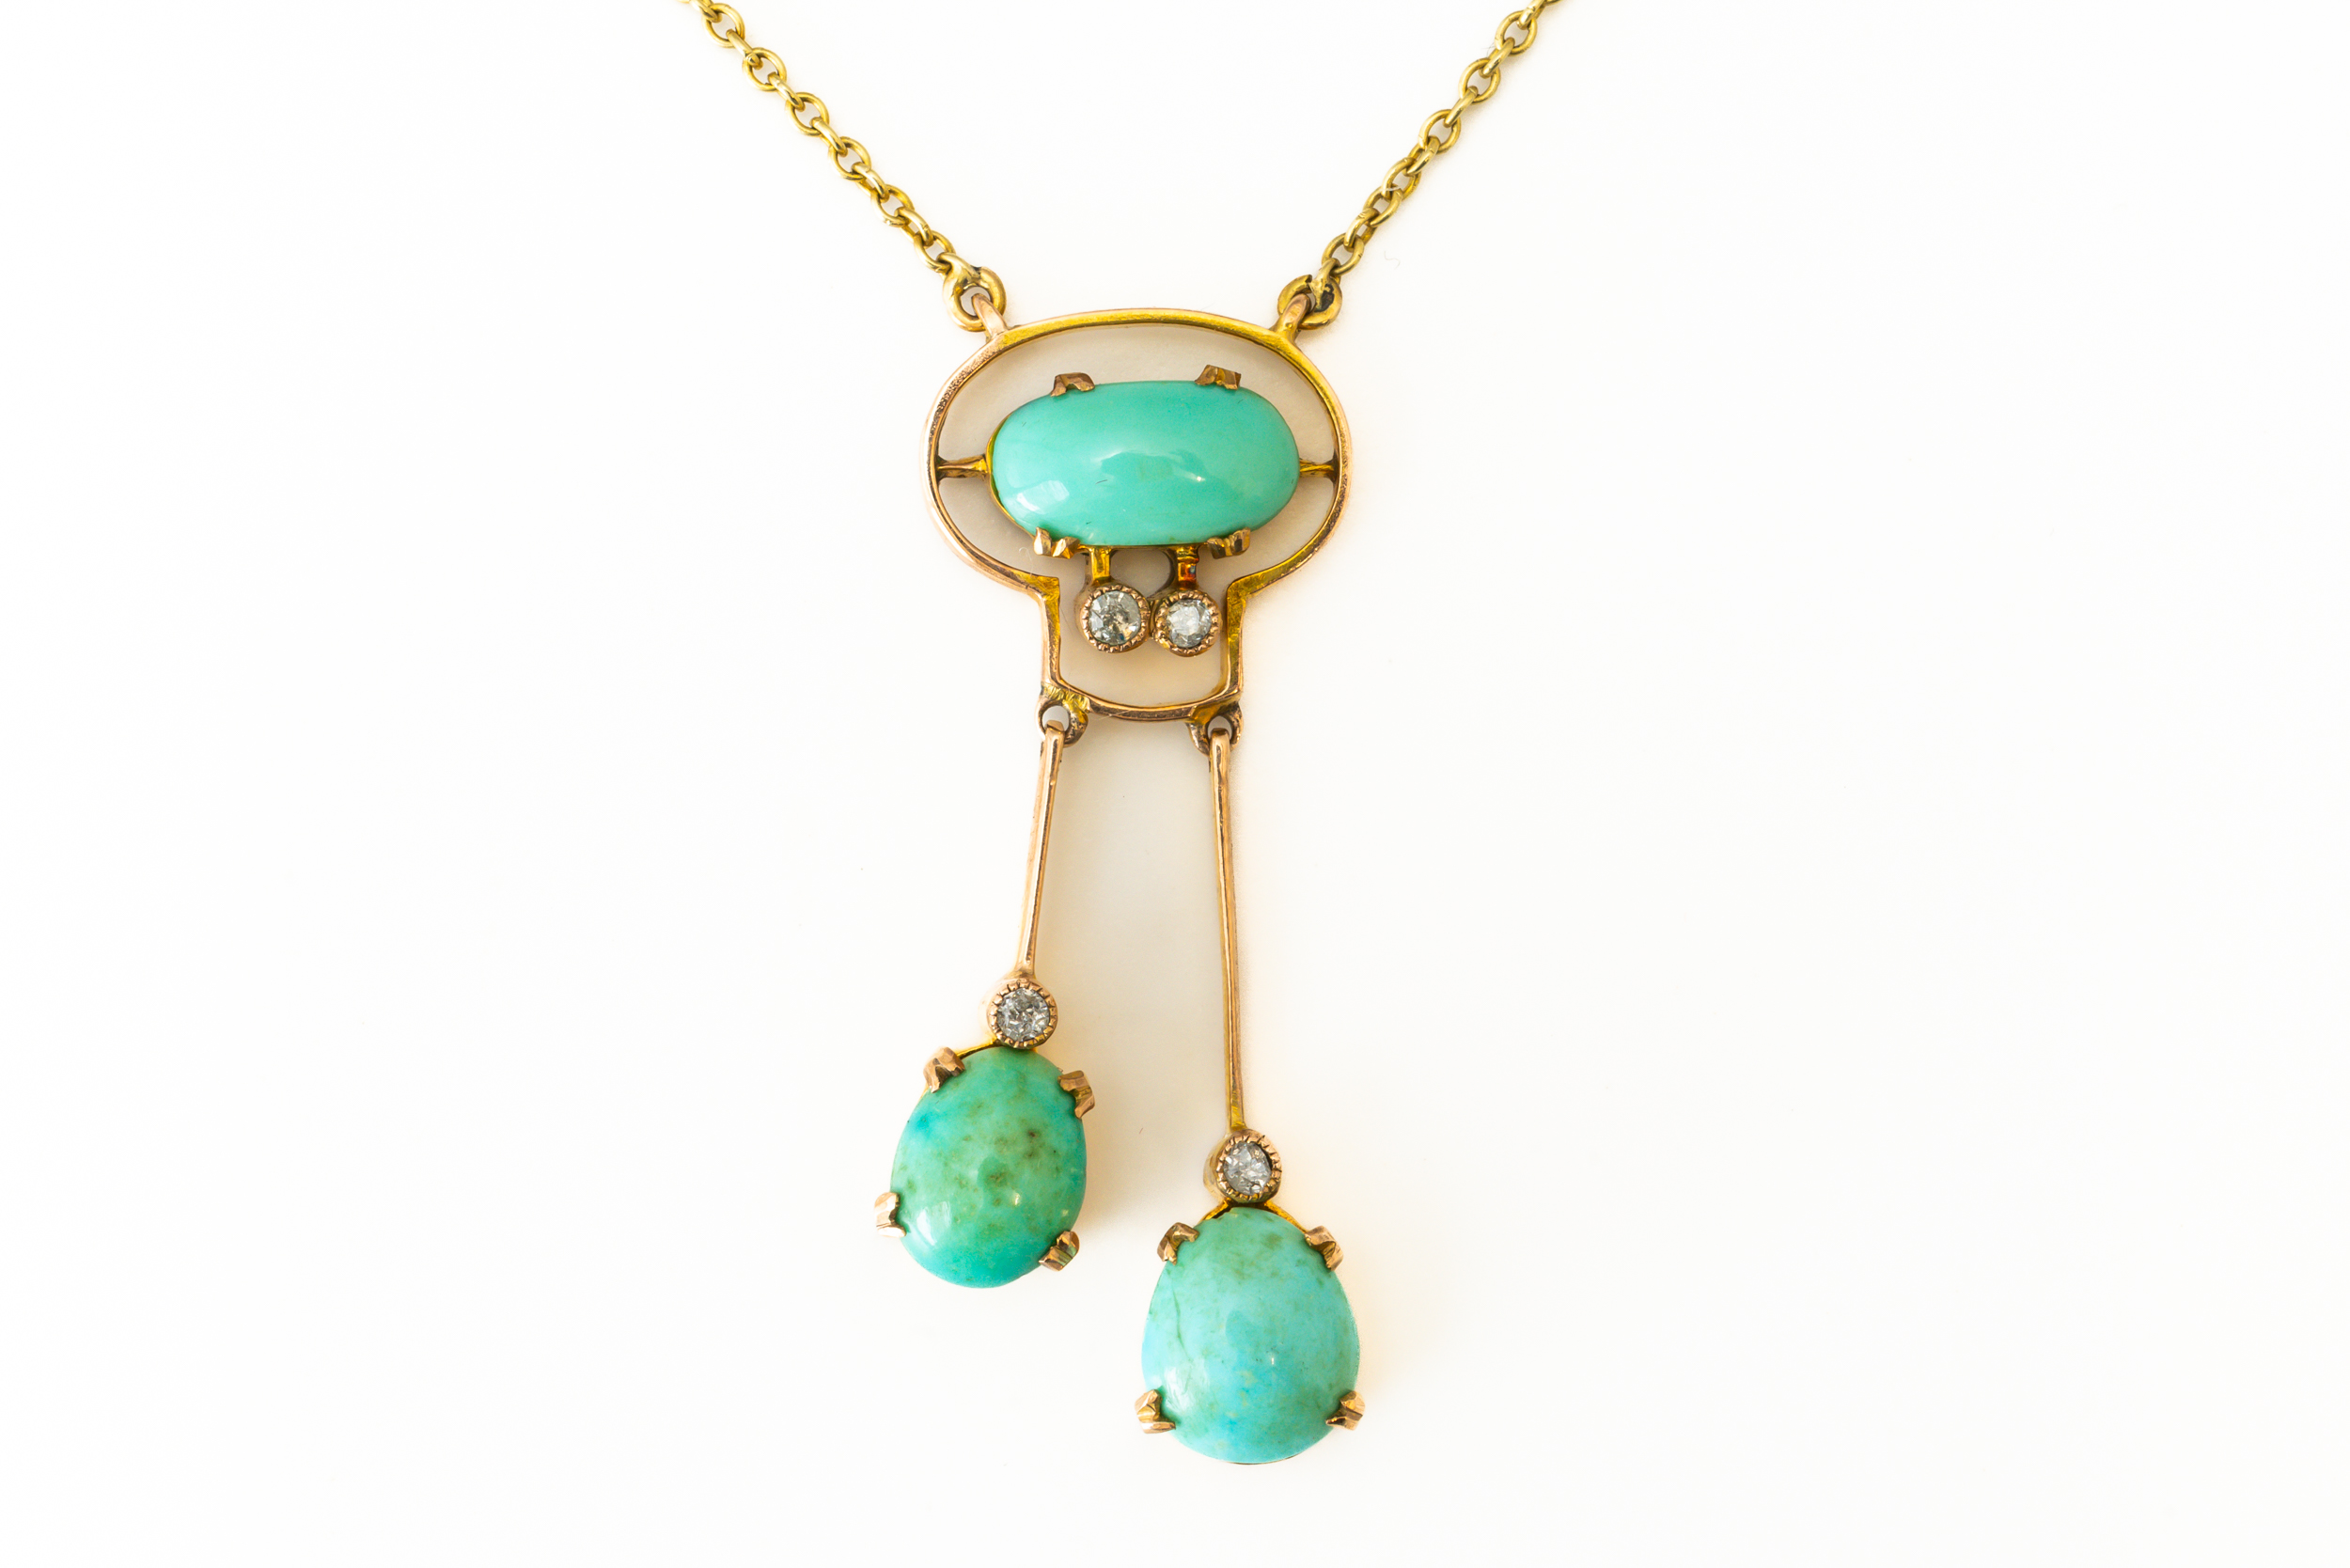 AN EDWARDIAN DIAMOND AND TURQUOISE NECKLACE - Image 2 of 4